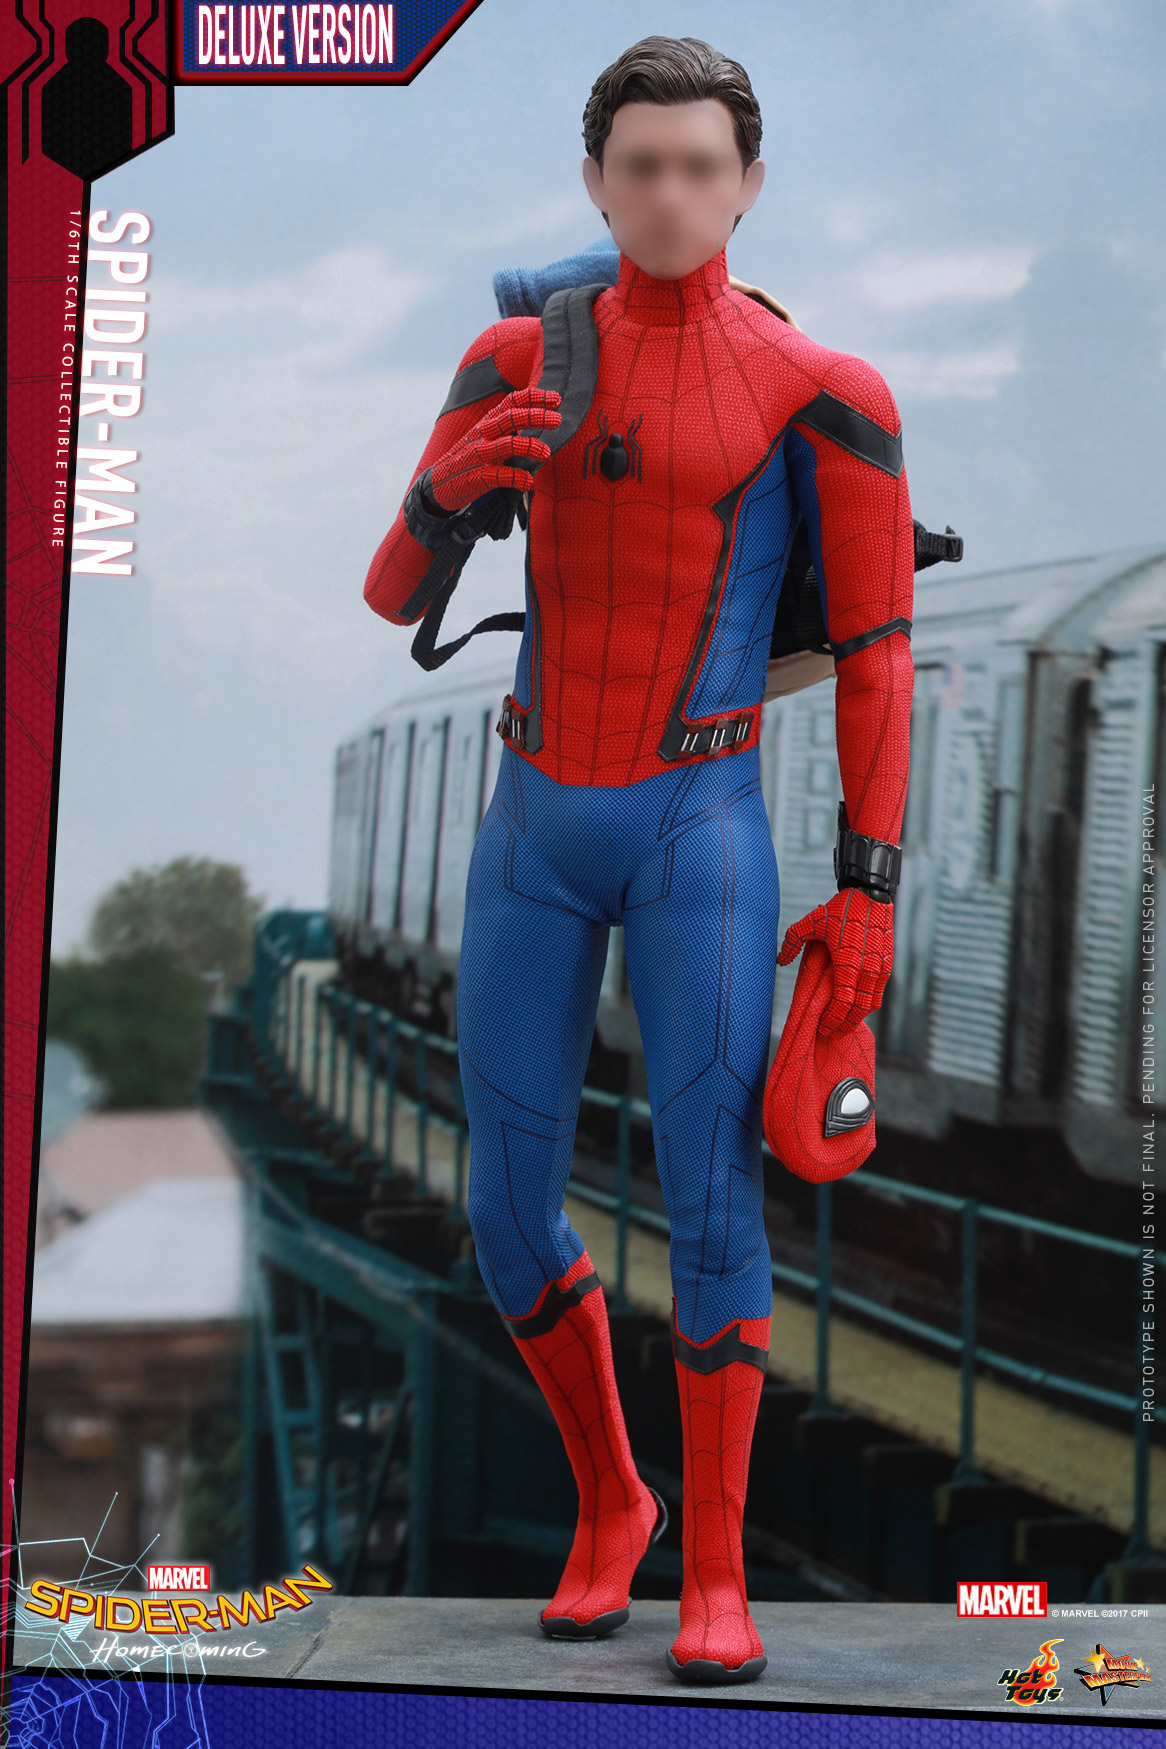 Hot-Toys---SMHC---Spider-Man-Collectible-Figure-(Deluxe-Version)_PR11